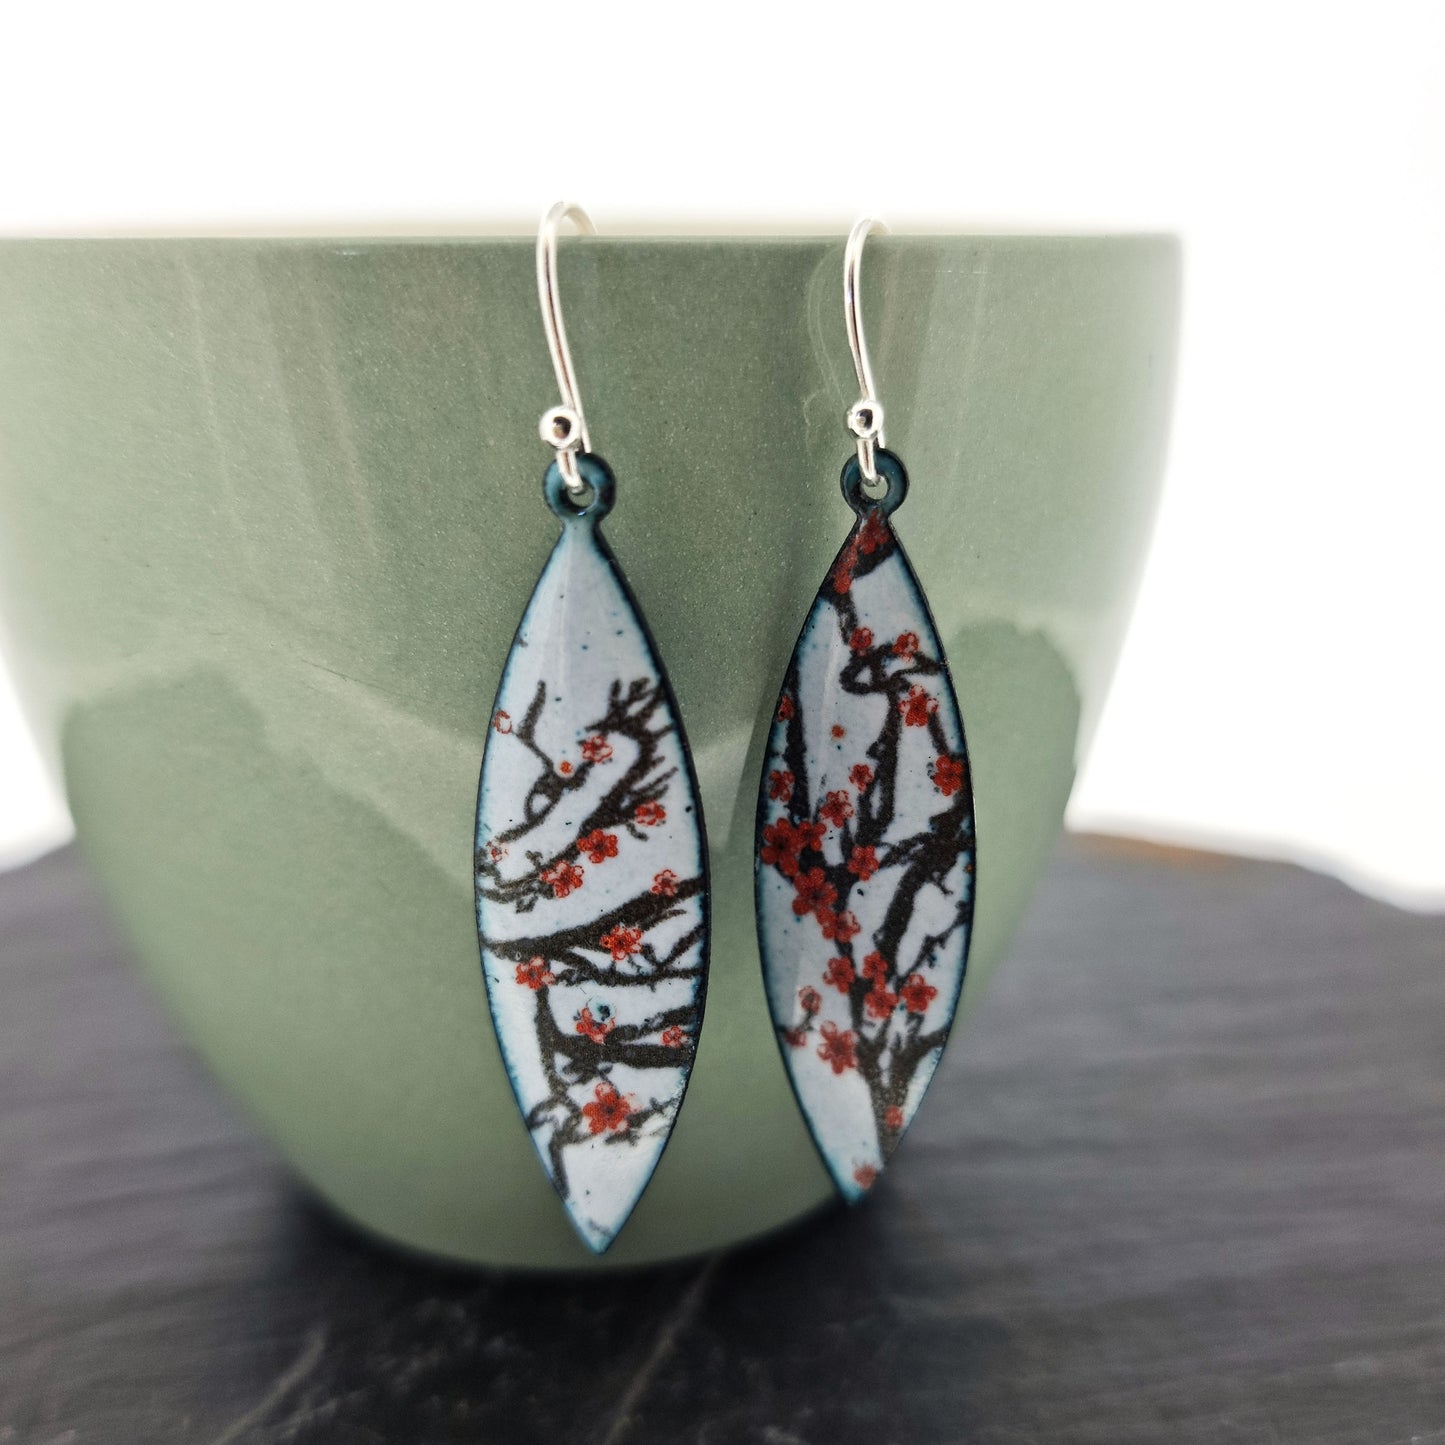 Boat-shaped enamel drop earrings with branches of red cherry blossom on a grey background. Pictured on a cup.